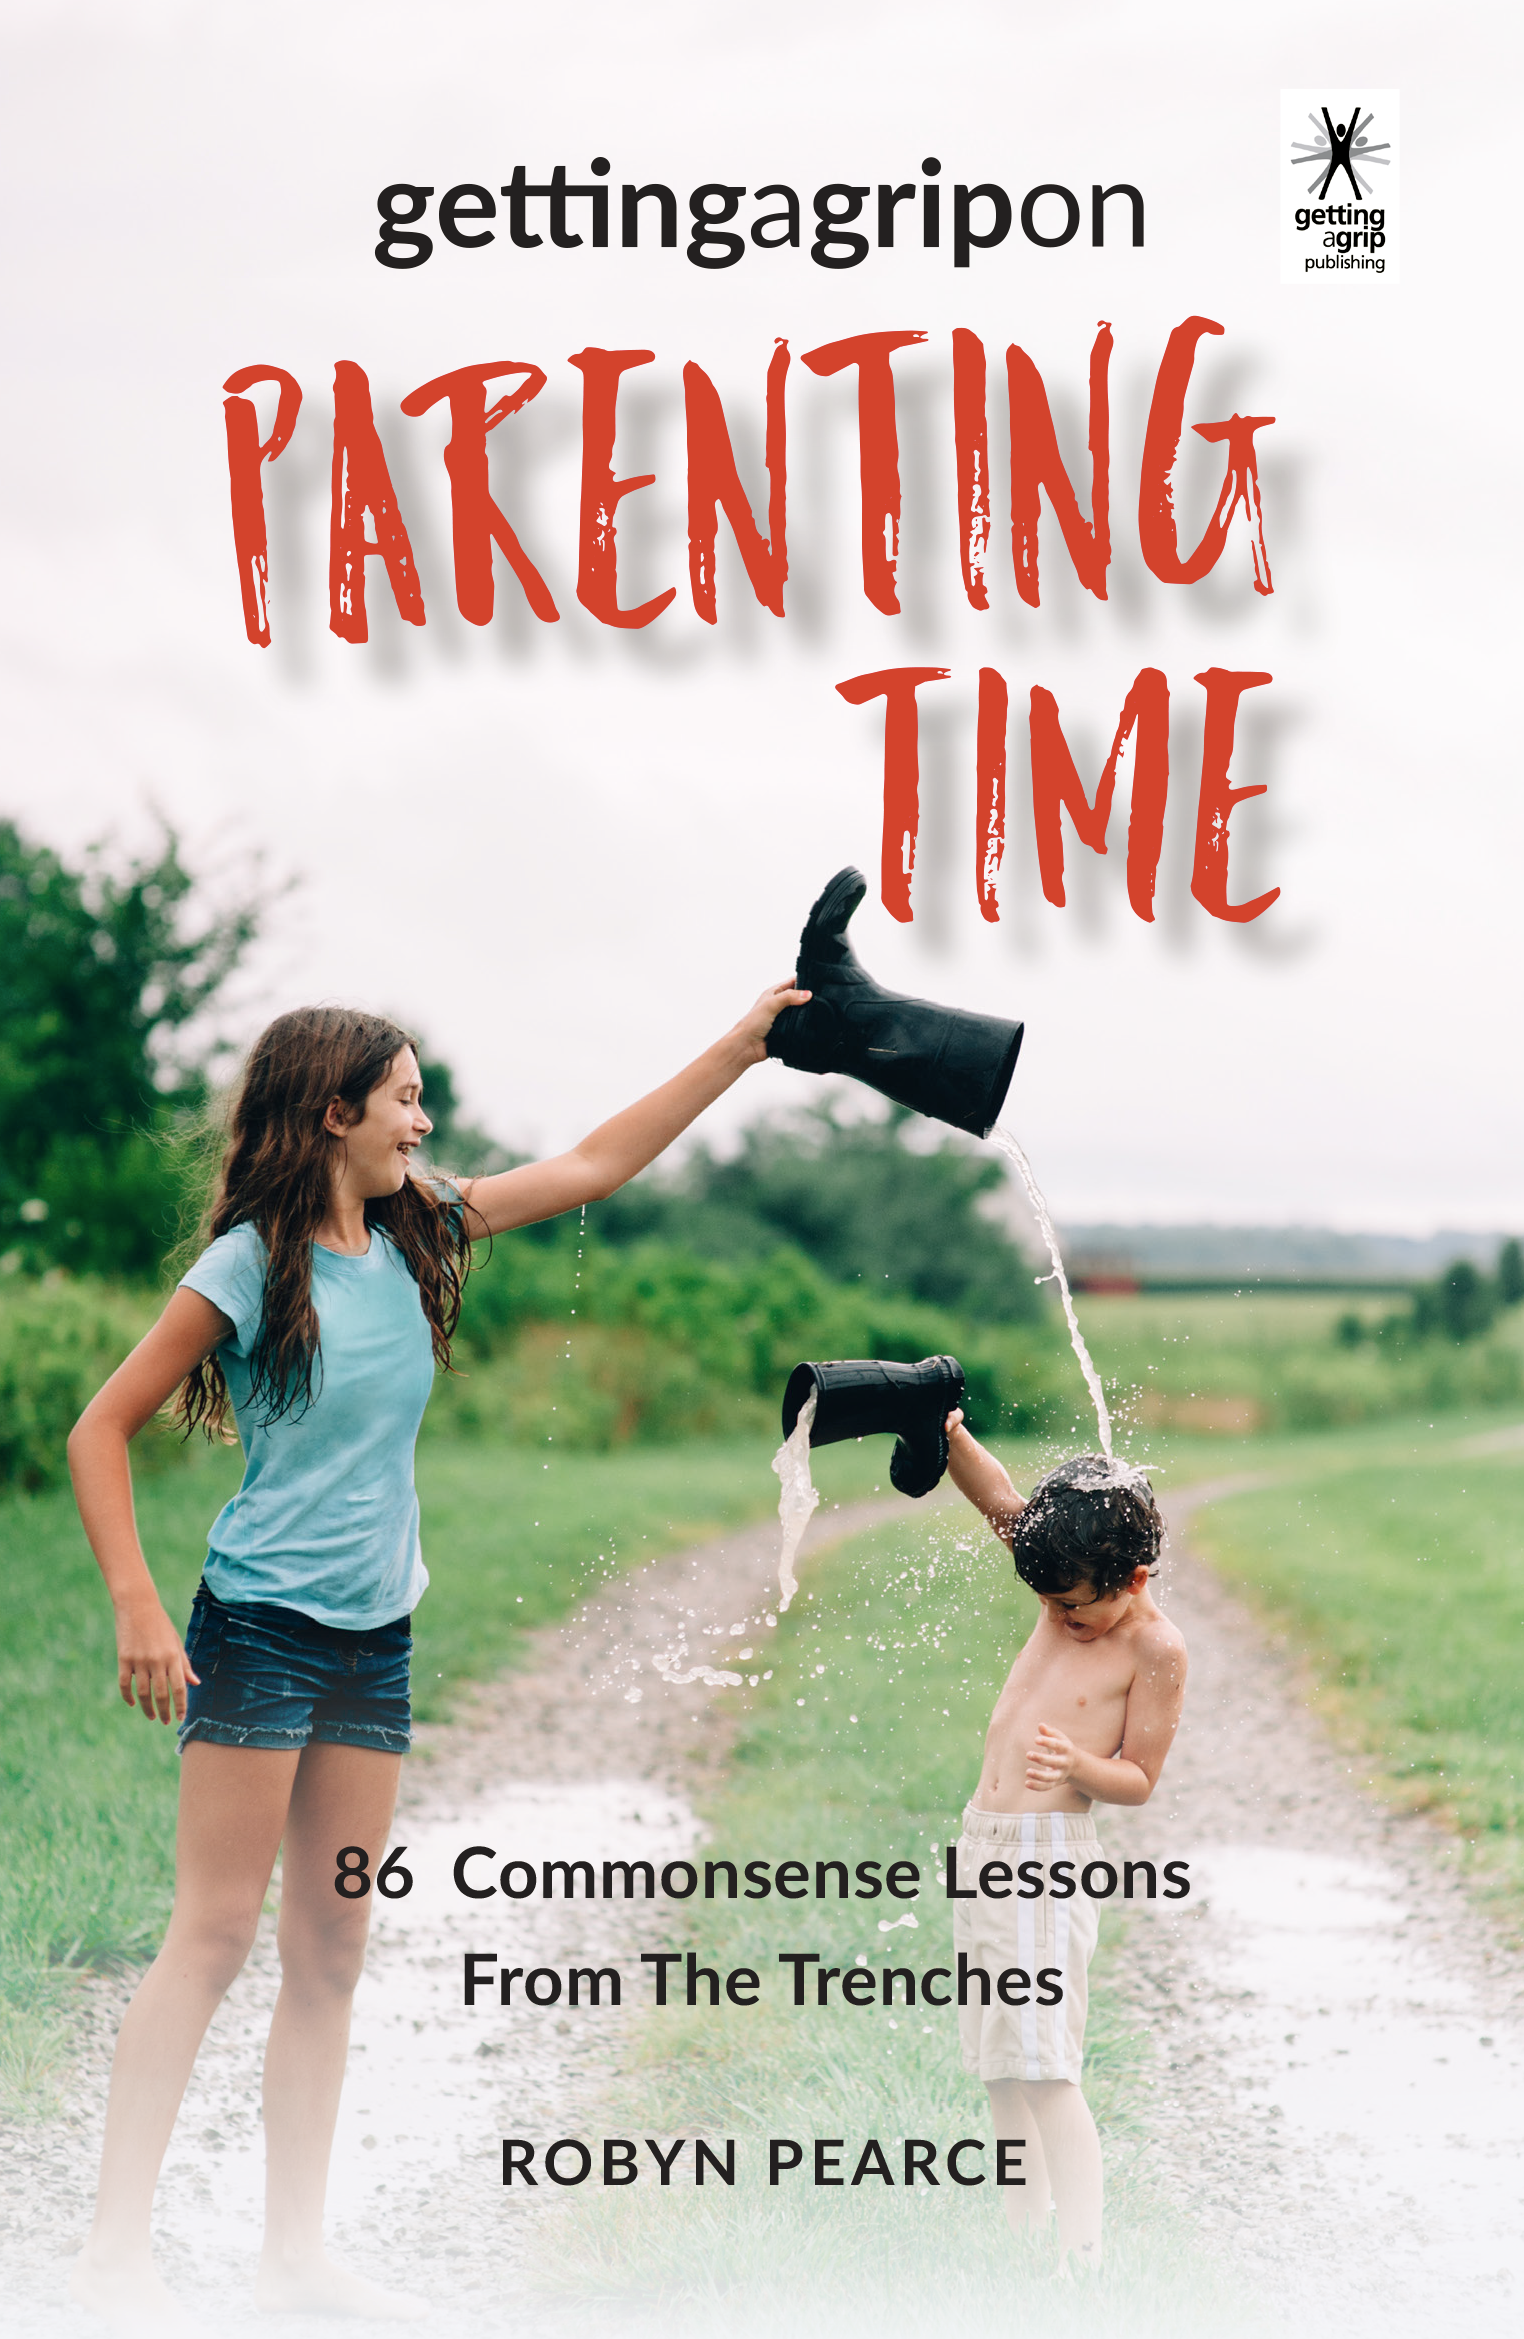 Getting A Grip On Parenting Time